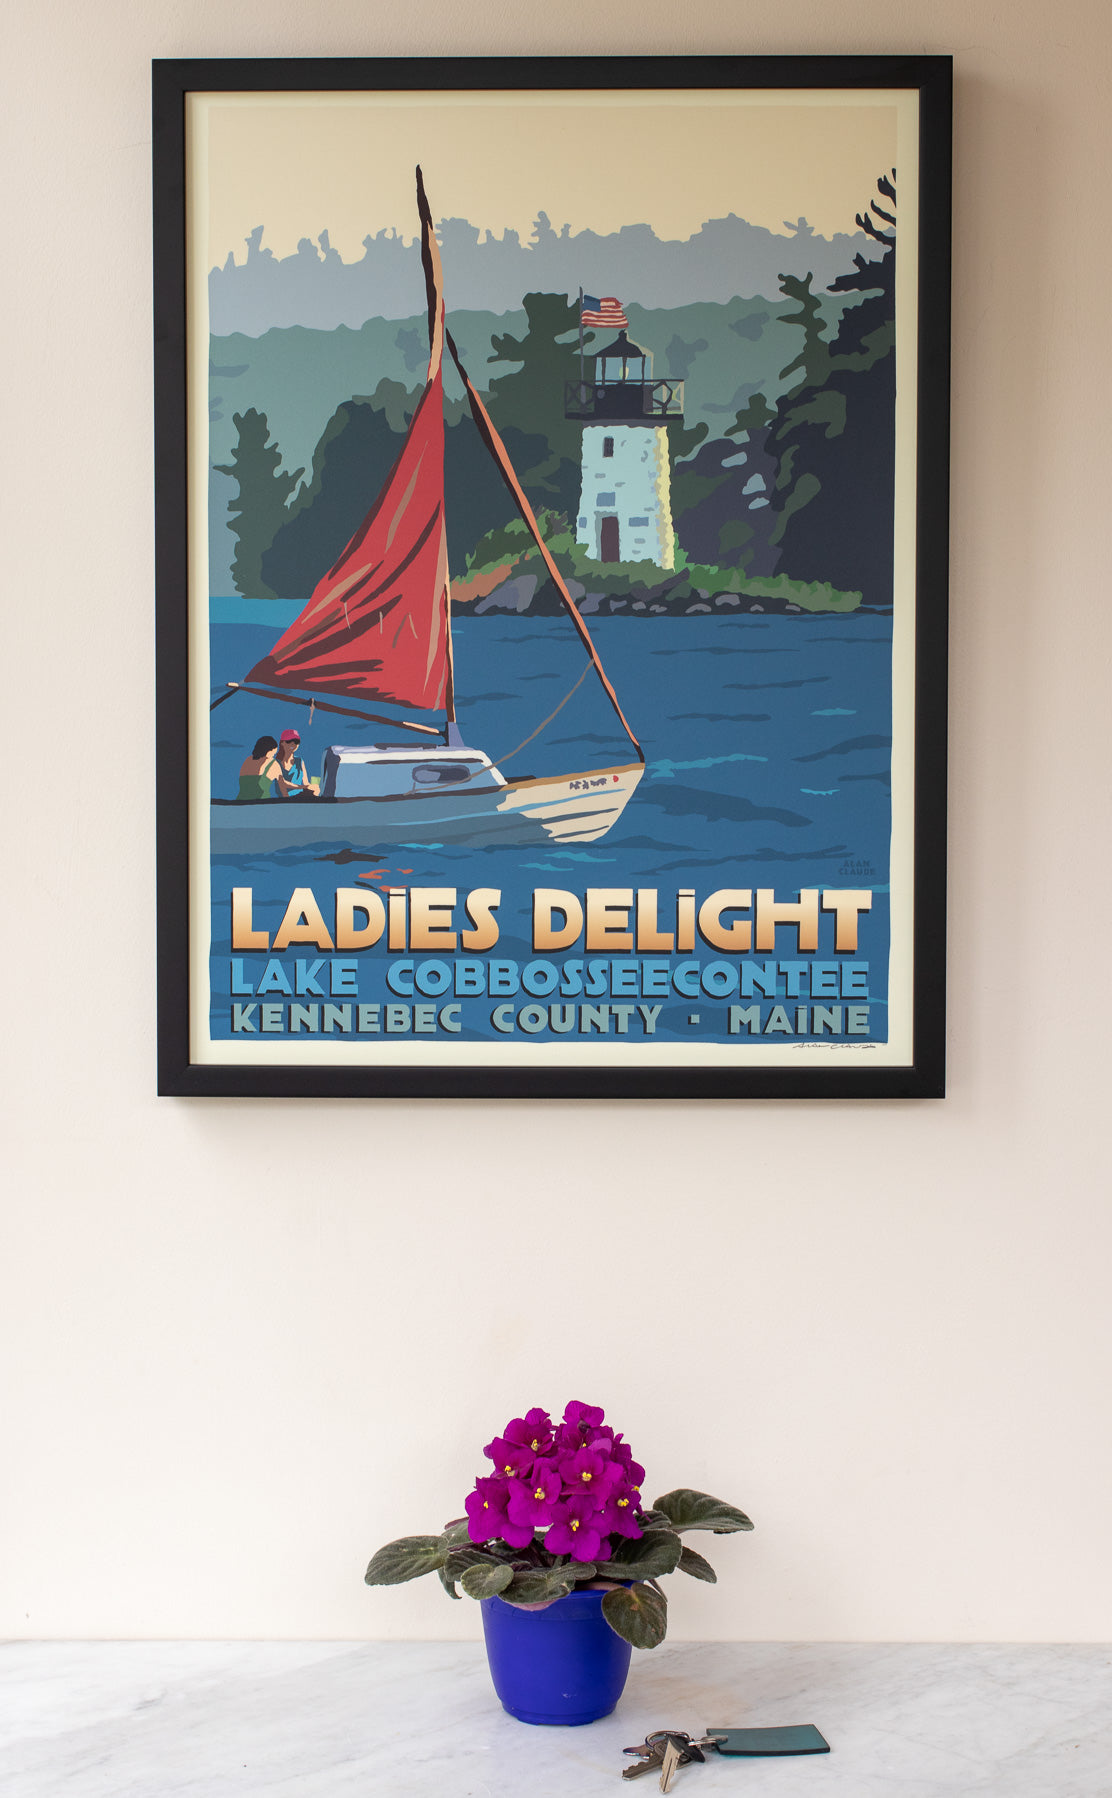 Sailing Ladies Delight Lighthouse Art Print 18" x 24" Framed Travel Poster By Alan Claude - Maine